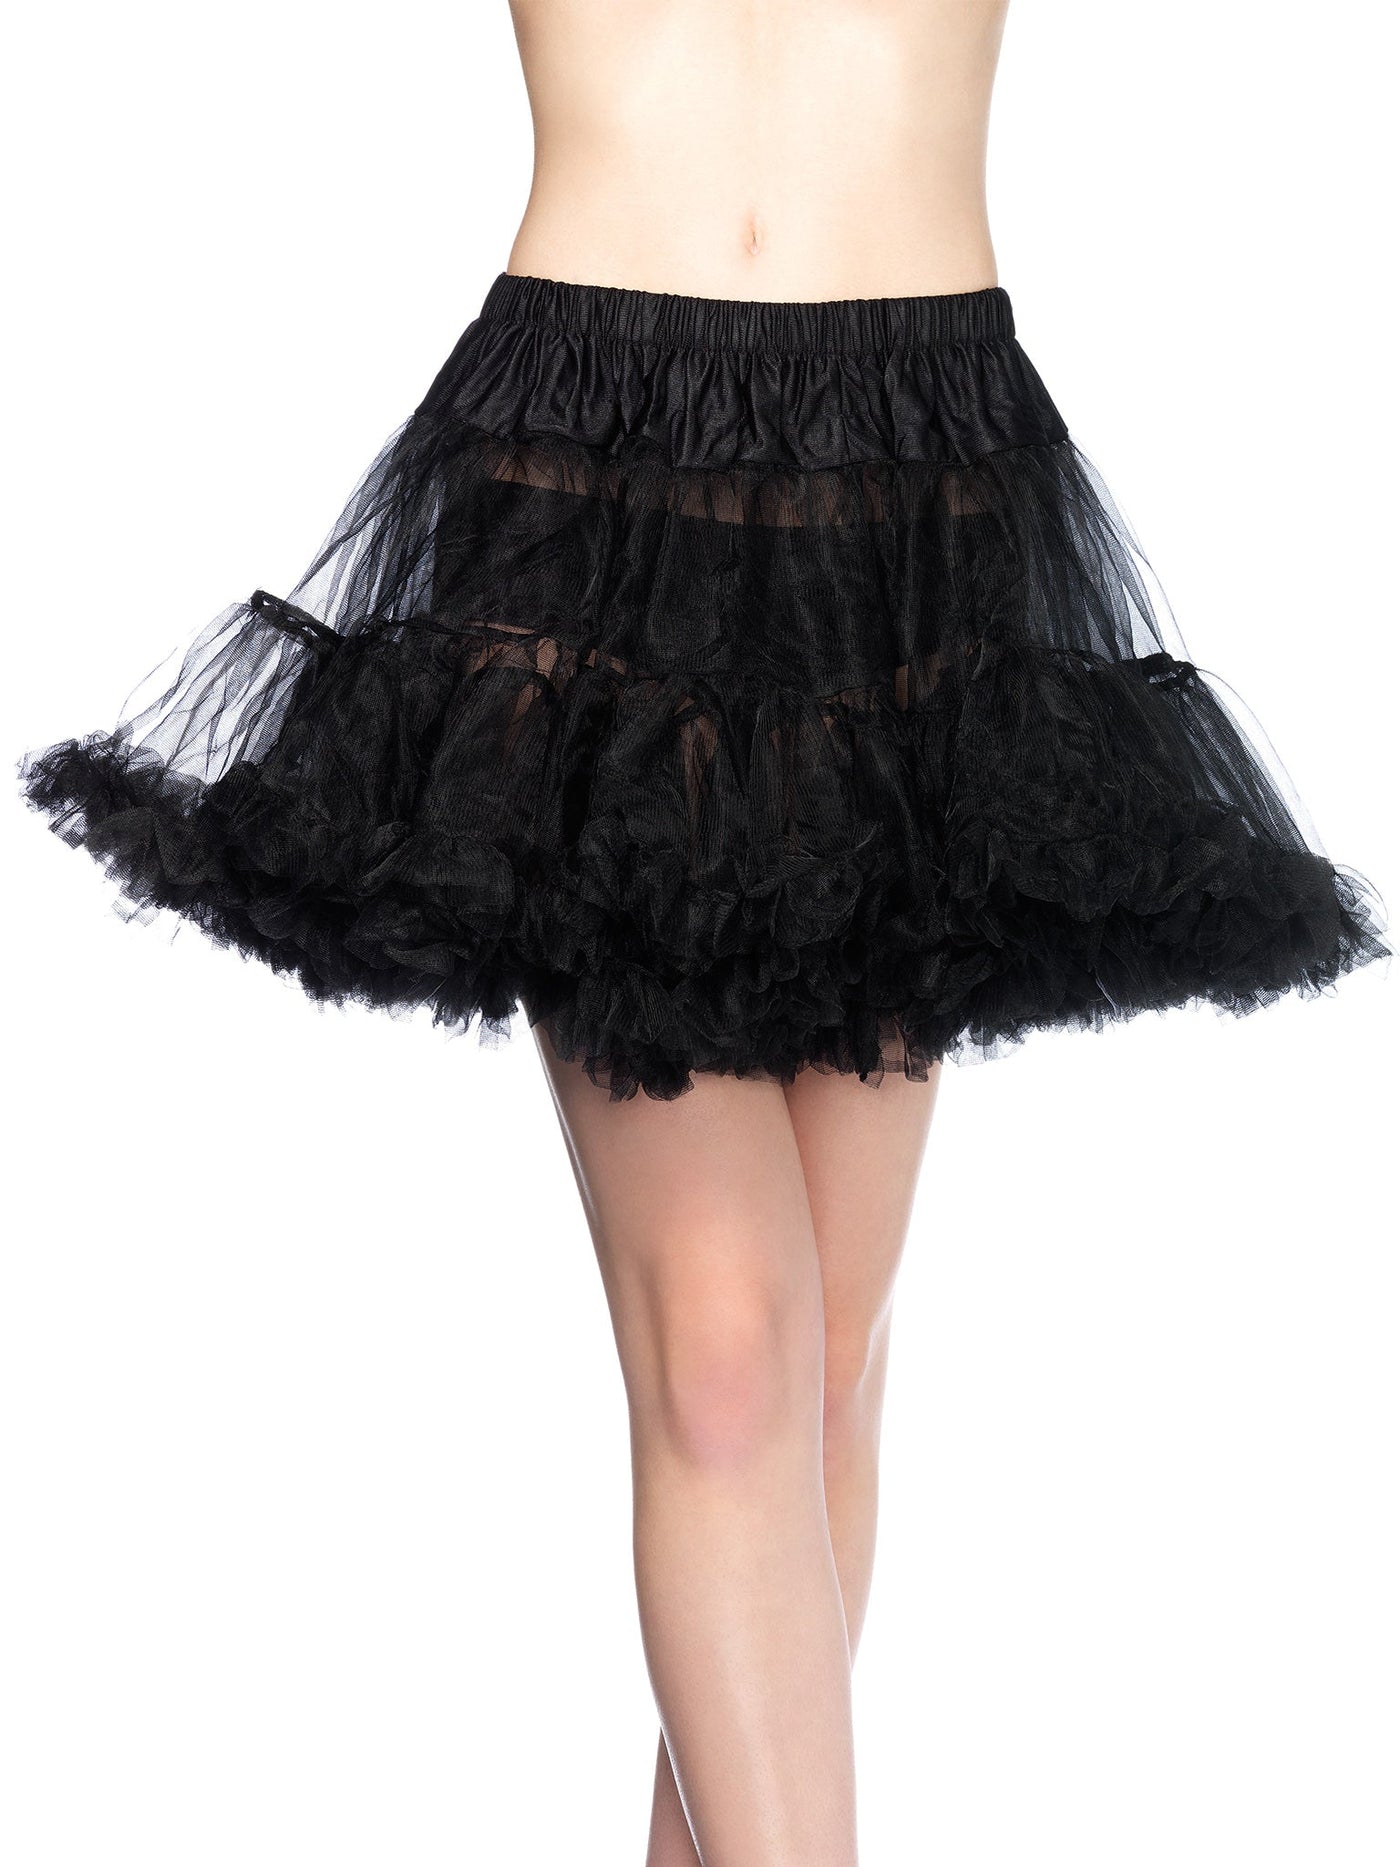 Layered Tulle Petticoat LEG-8990 TEAL O/S - JJ's Party House